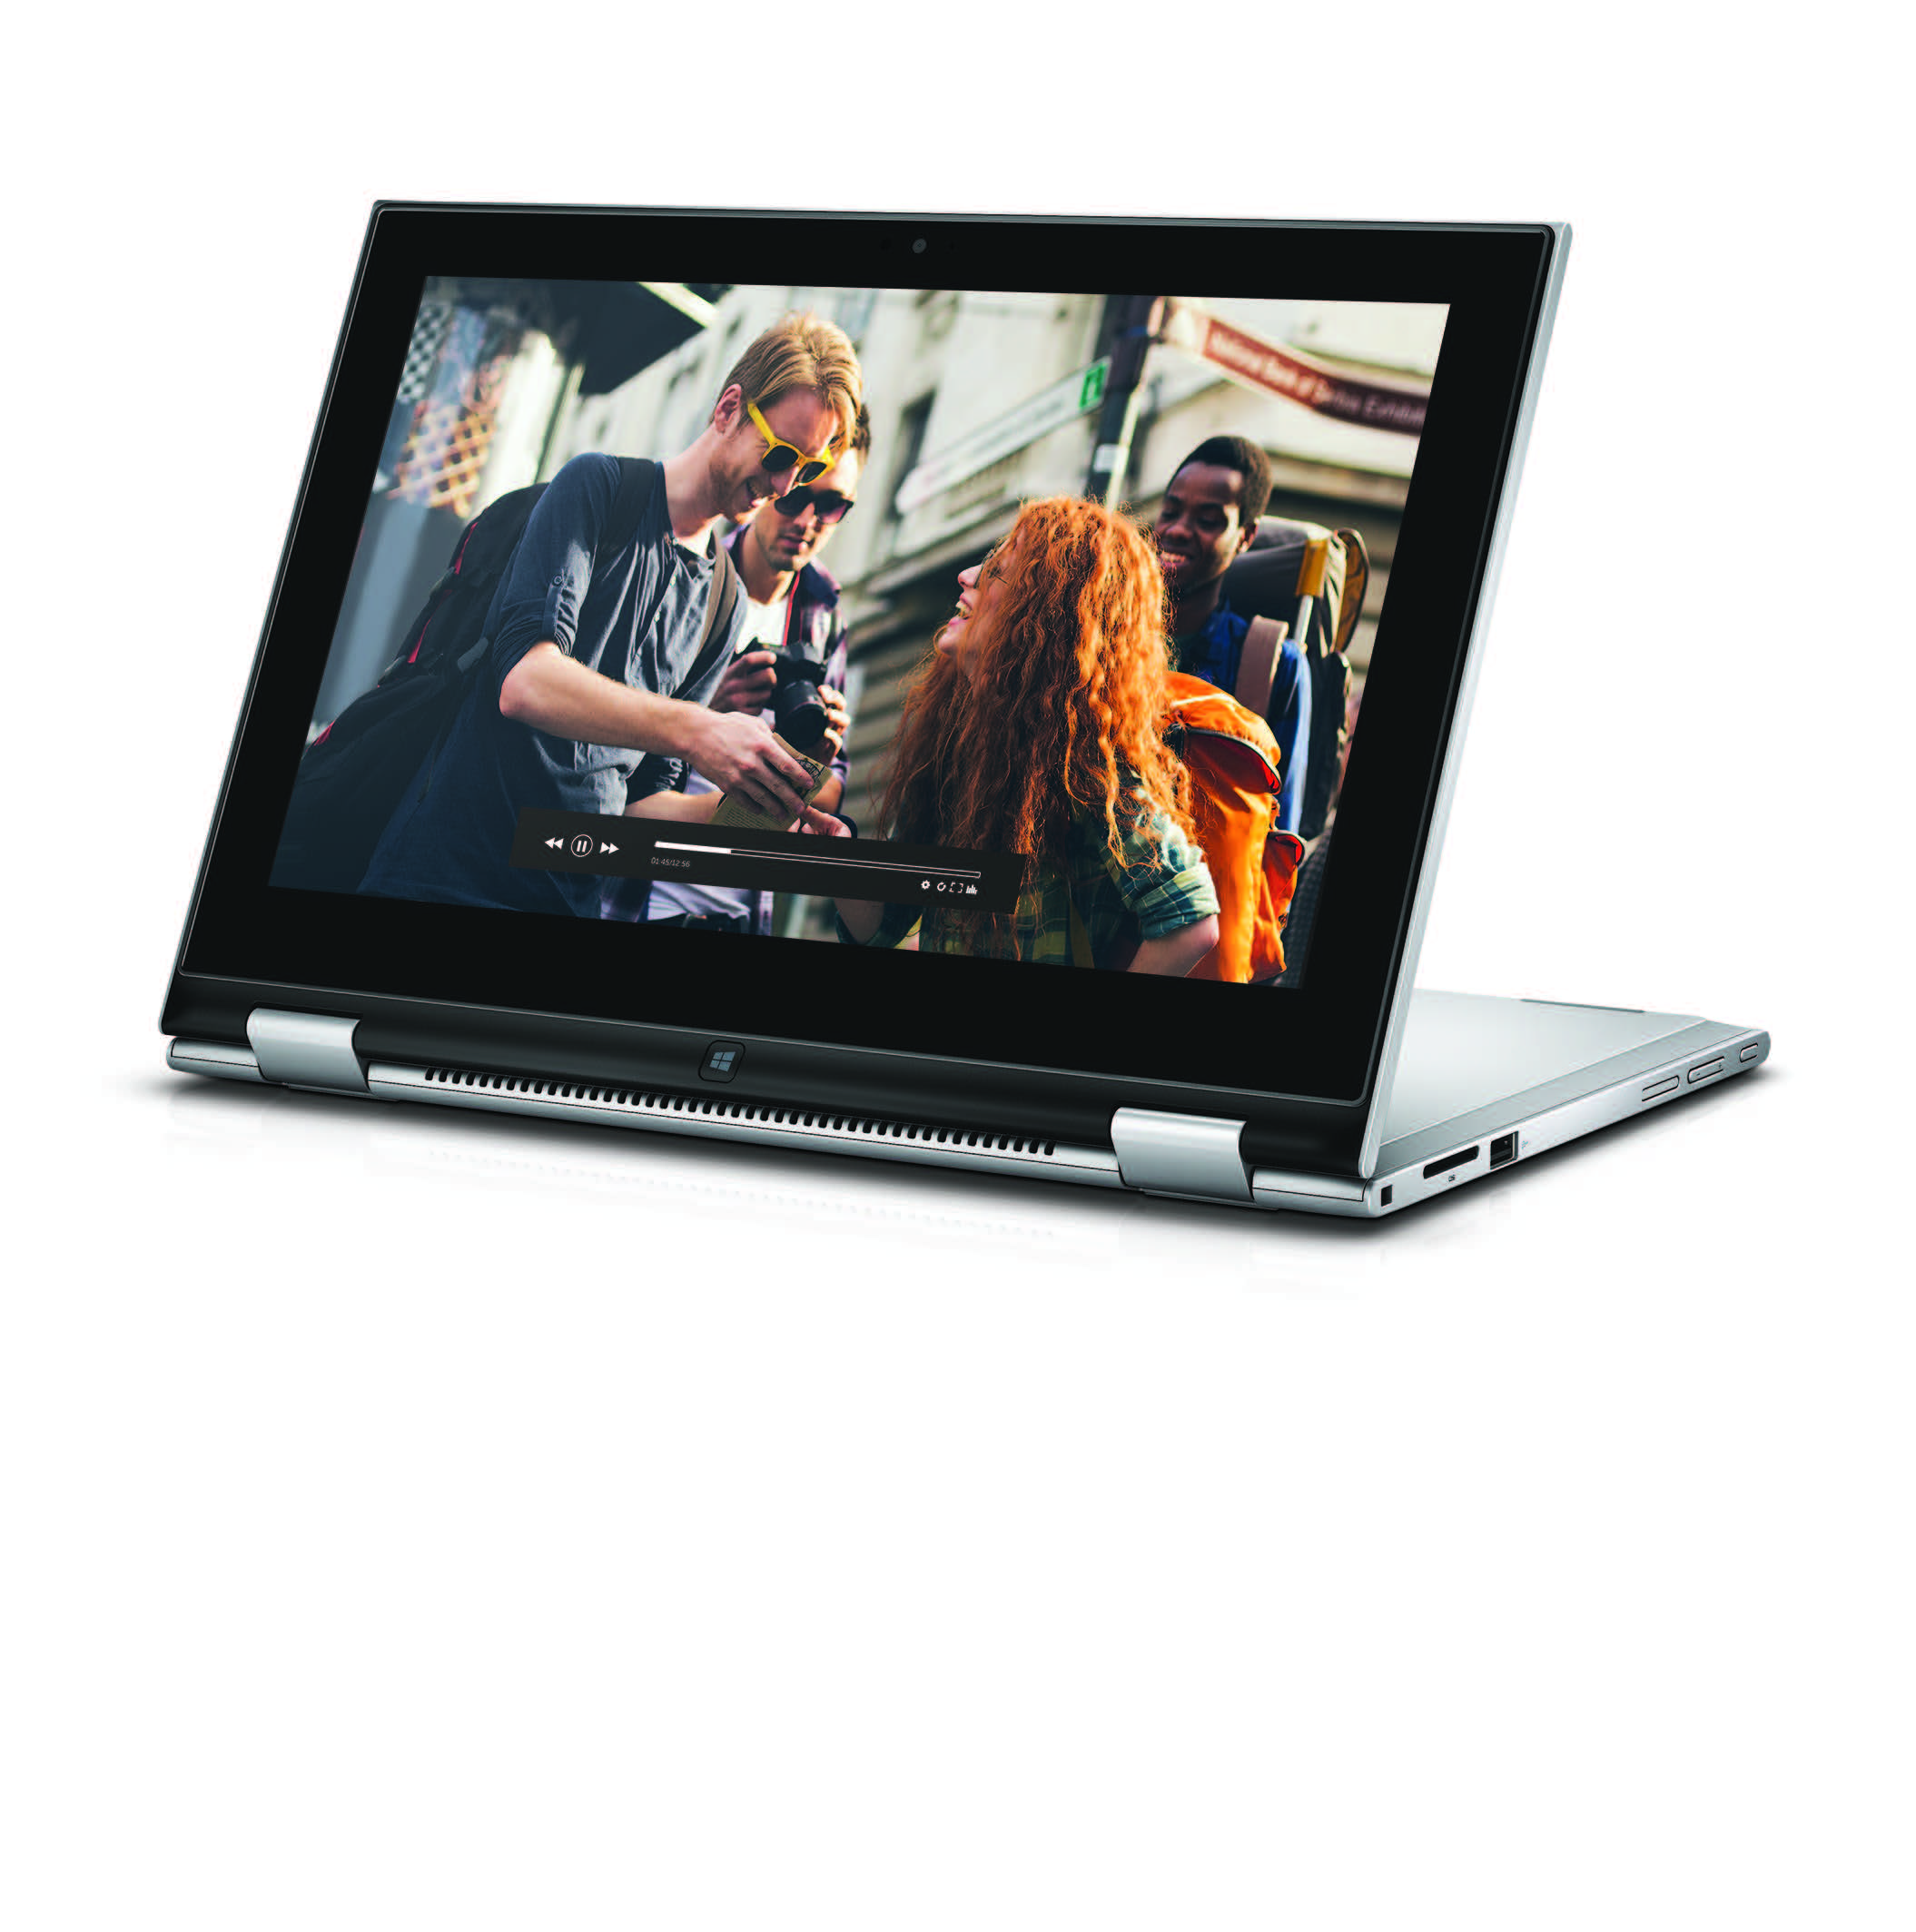 Intel-based Dell Inspiron 11 3000 2 in 1 device